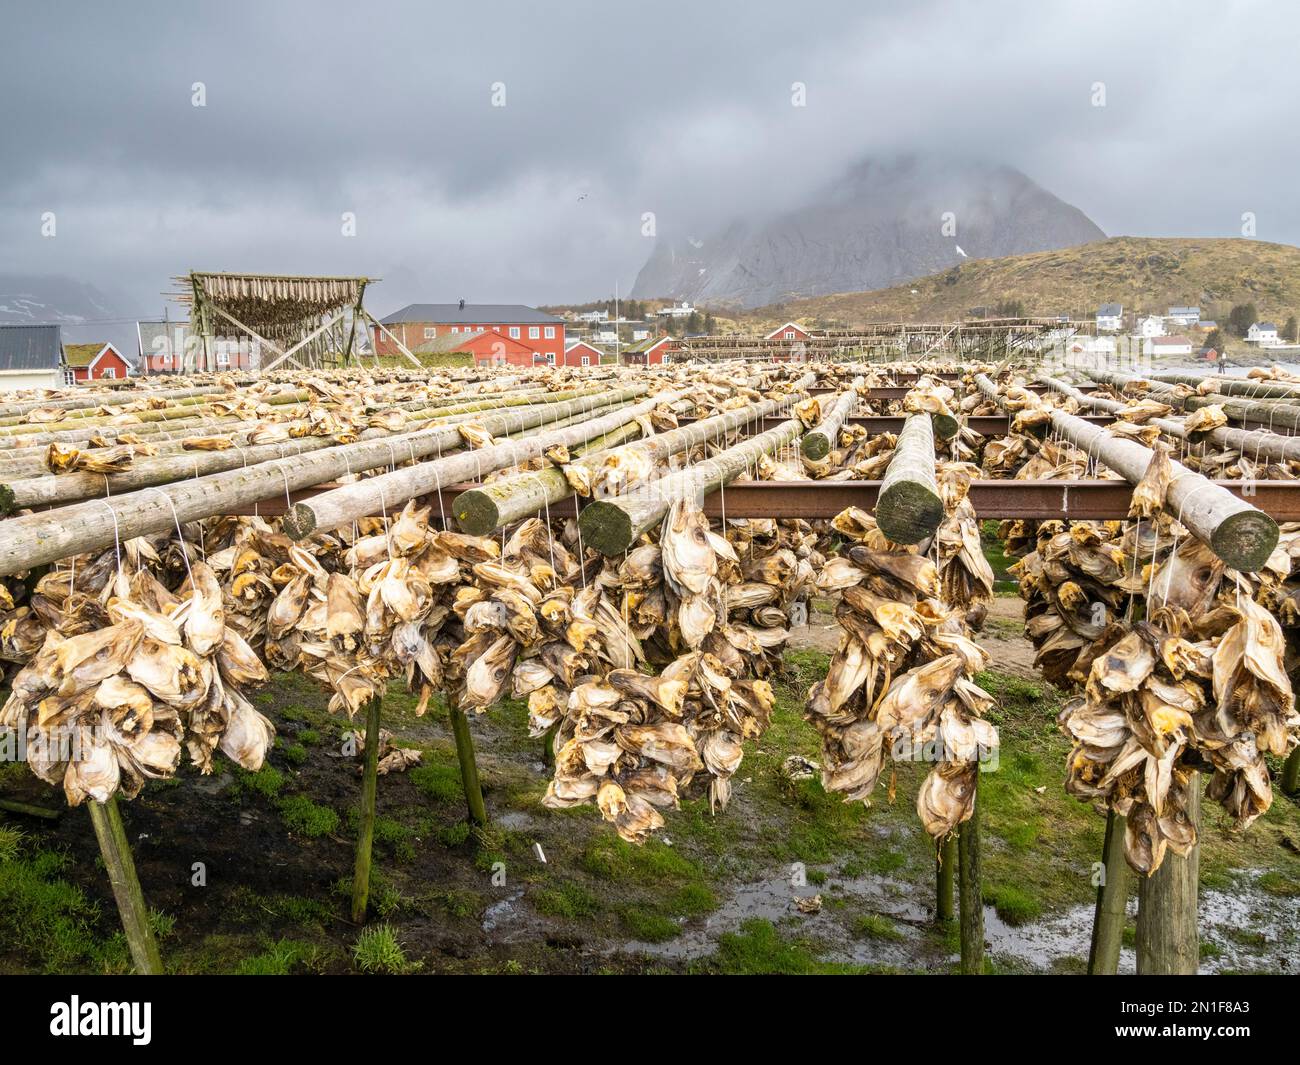 Cod drying on racks to become stockfish in the town of Reine, Moskenesoya in the Lofoten archipelago, Norway, Scandinavia, Europe Stock Photo